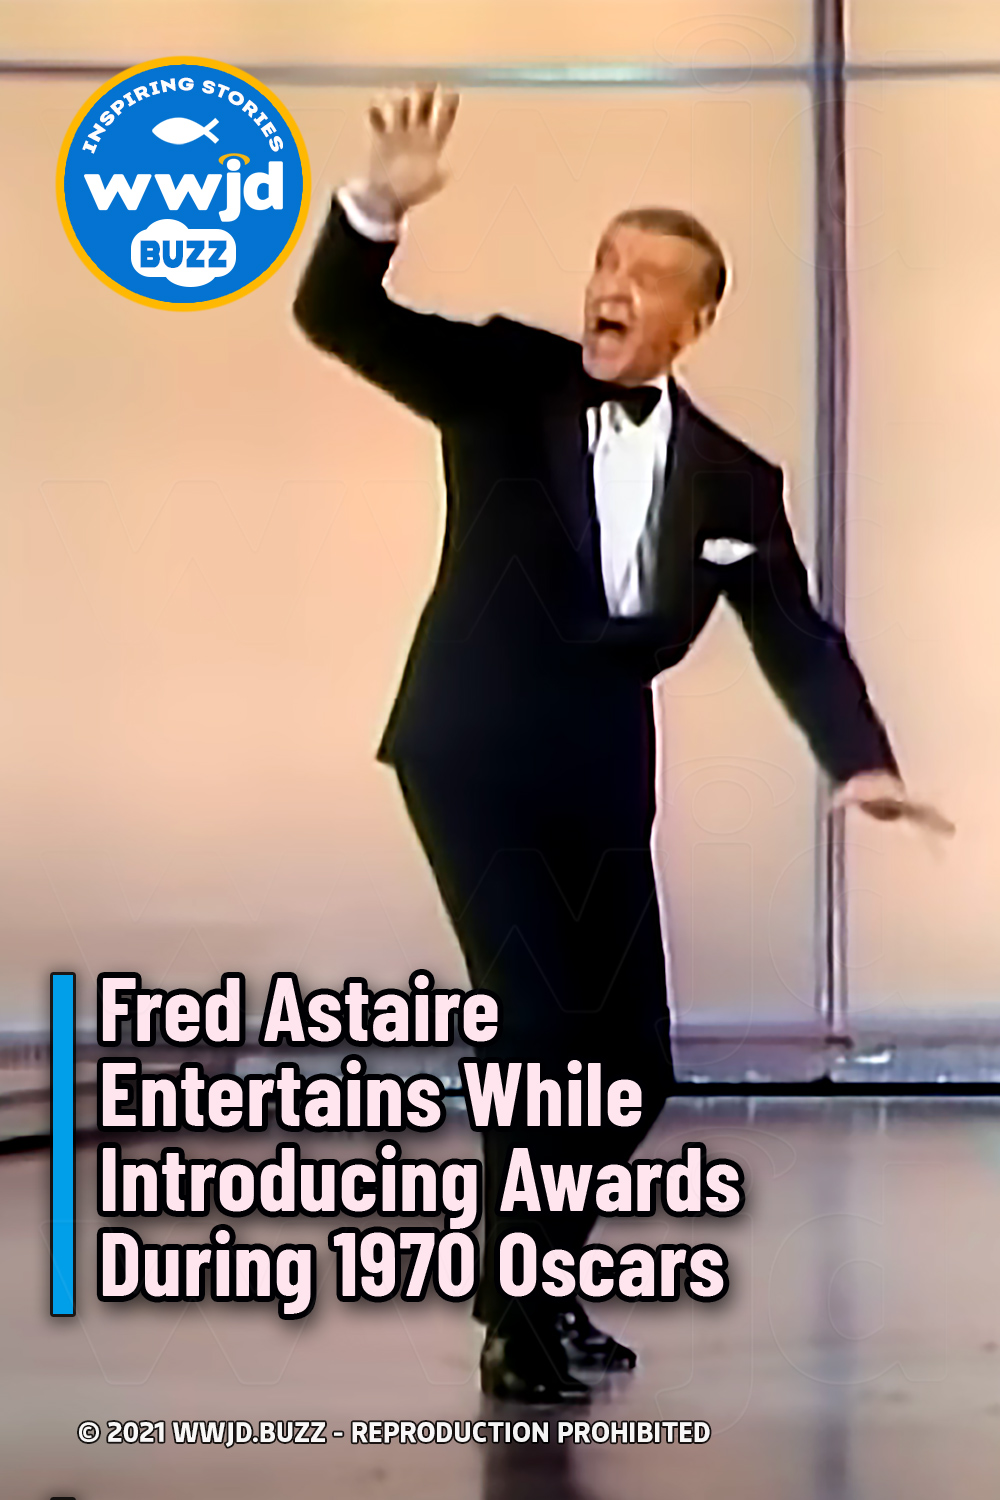 Fred Astaire Entertains While Introducing Awards During 1970 Oscars